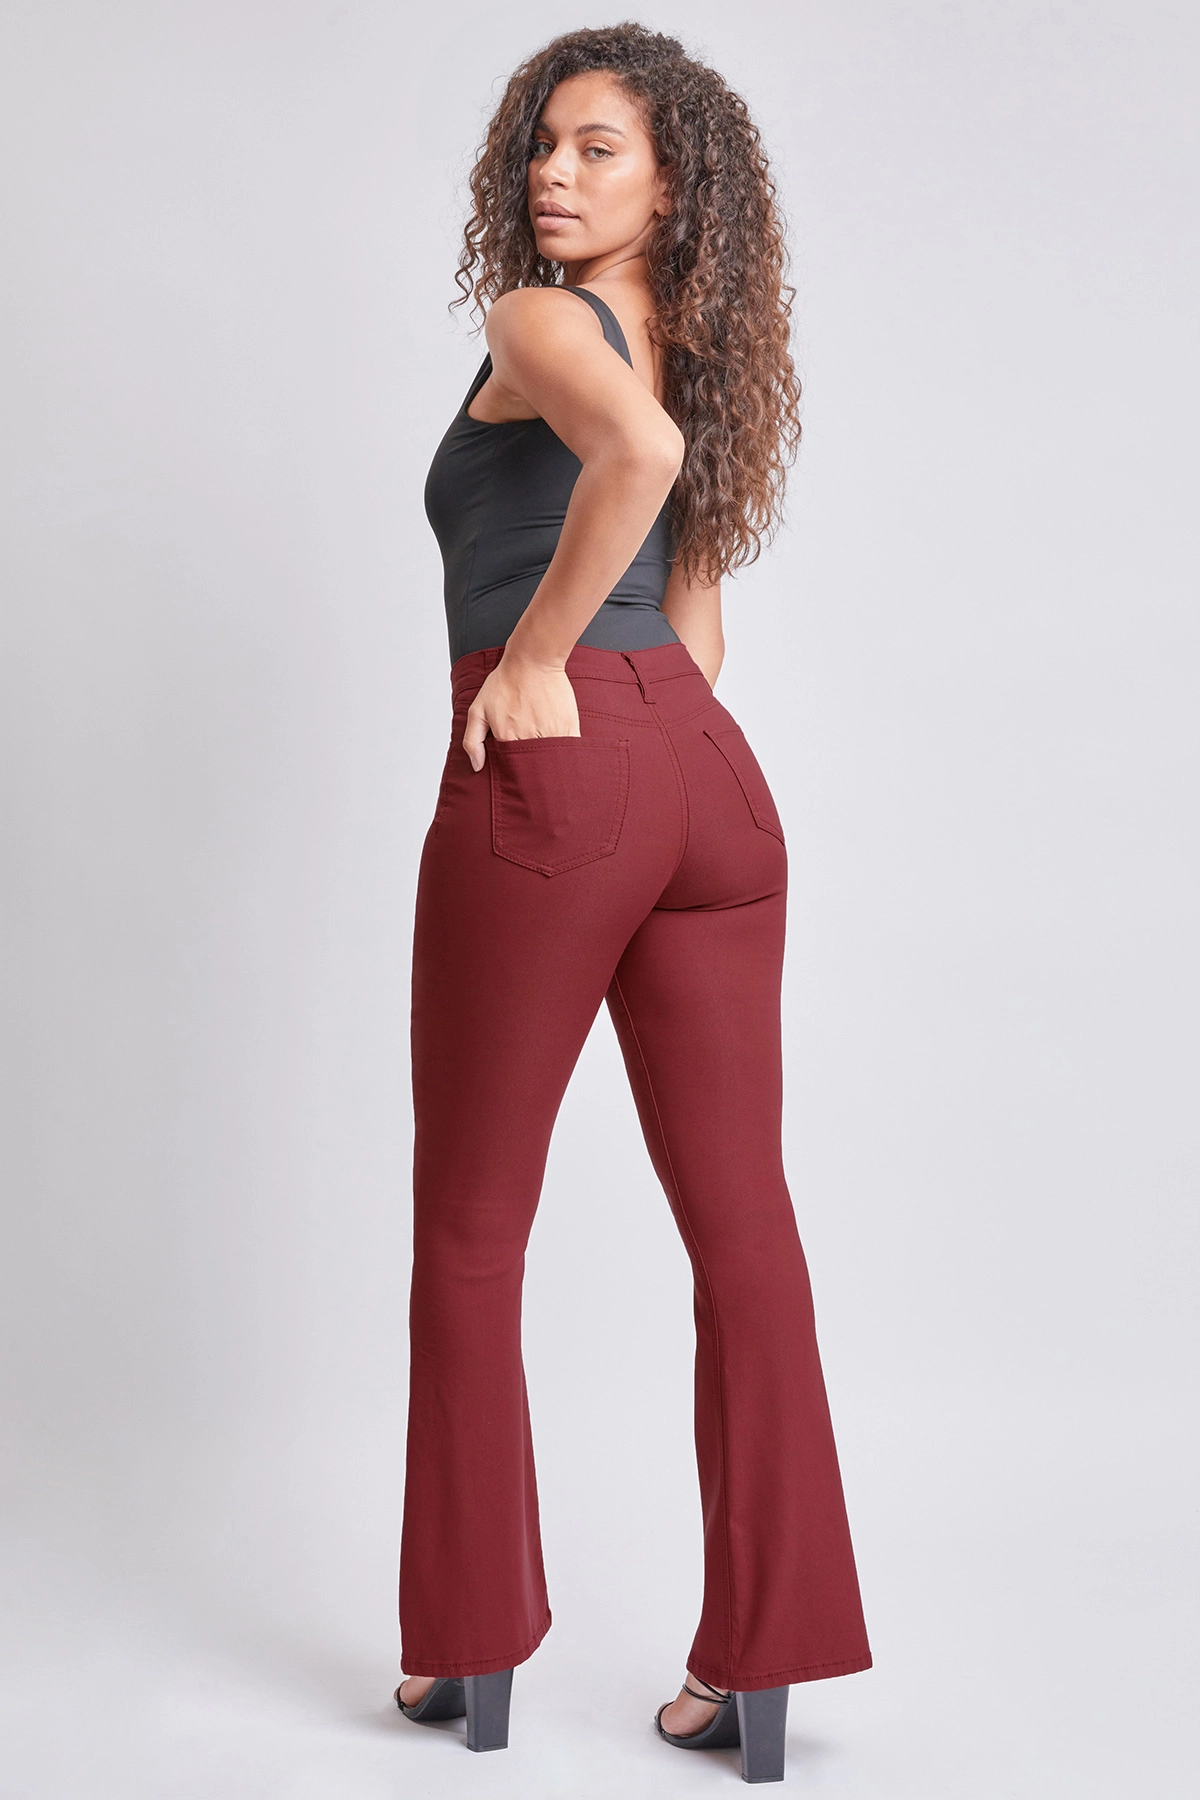 Red's Boutique Online | Trendy Women's Clothing Fashion Boutique